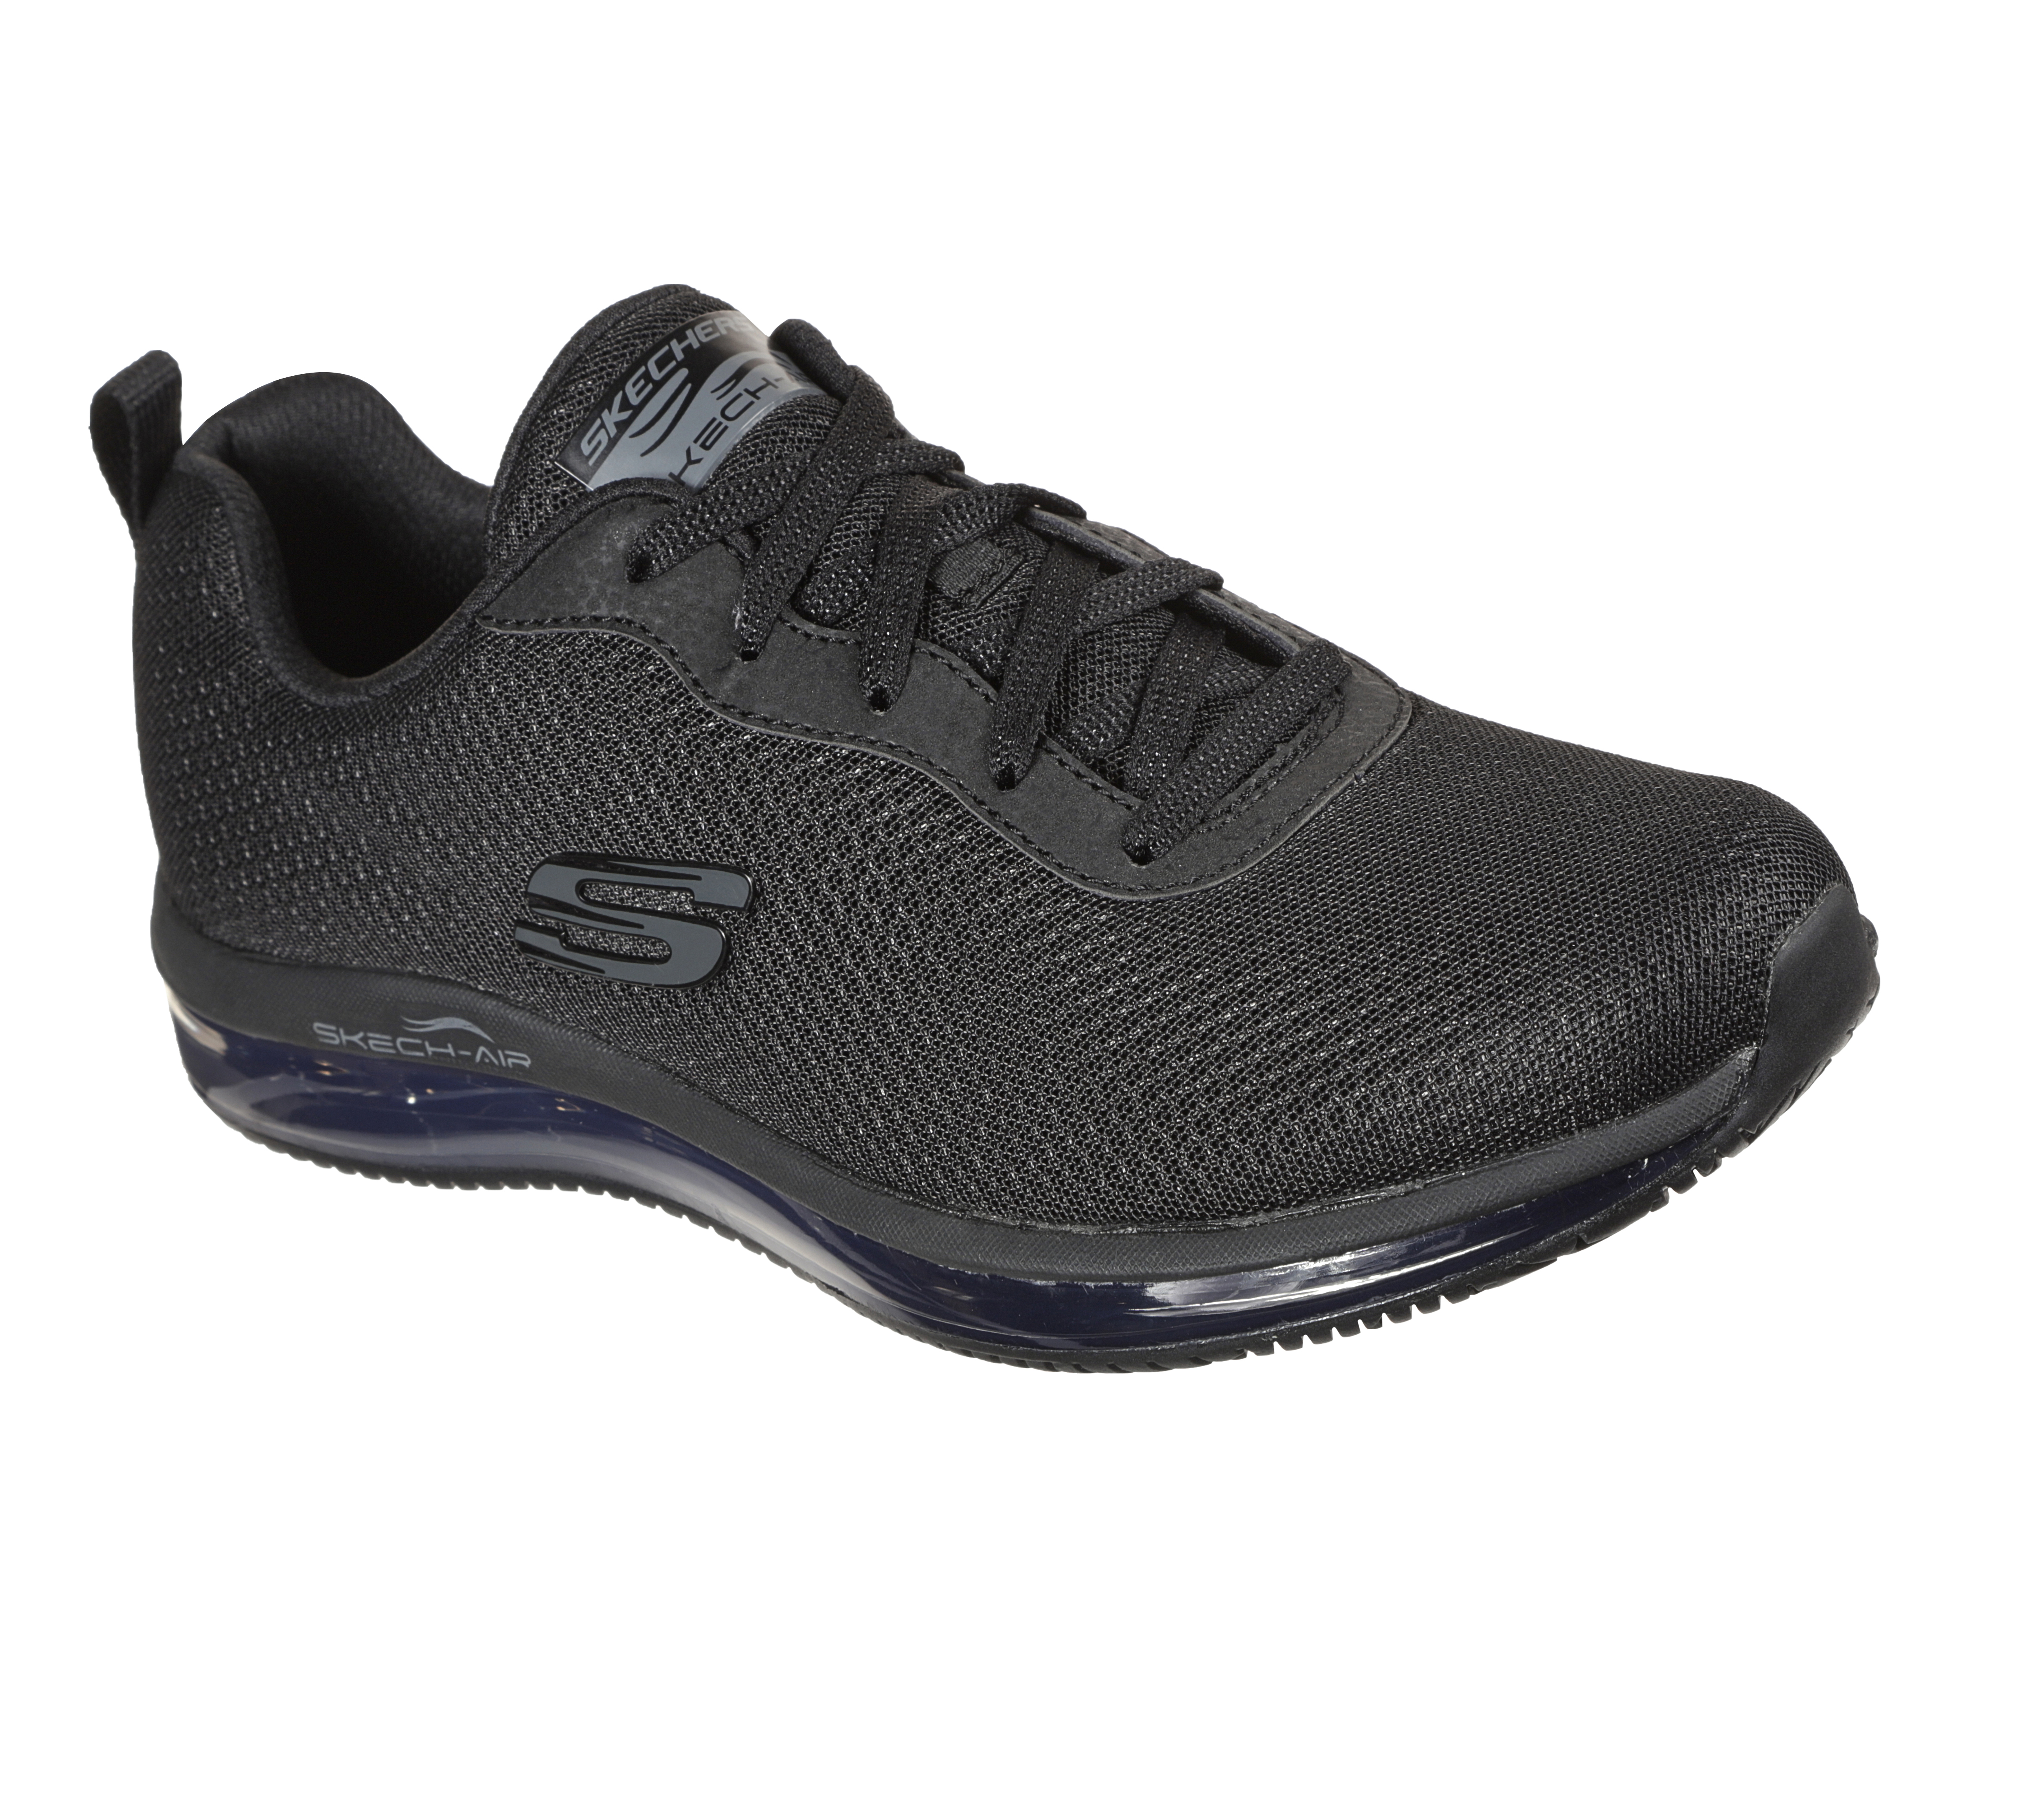 Work Relaxed Fit: Skech-Air SR | SKECHERS